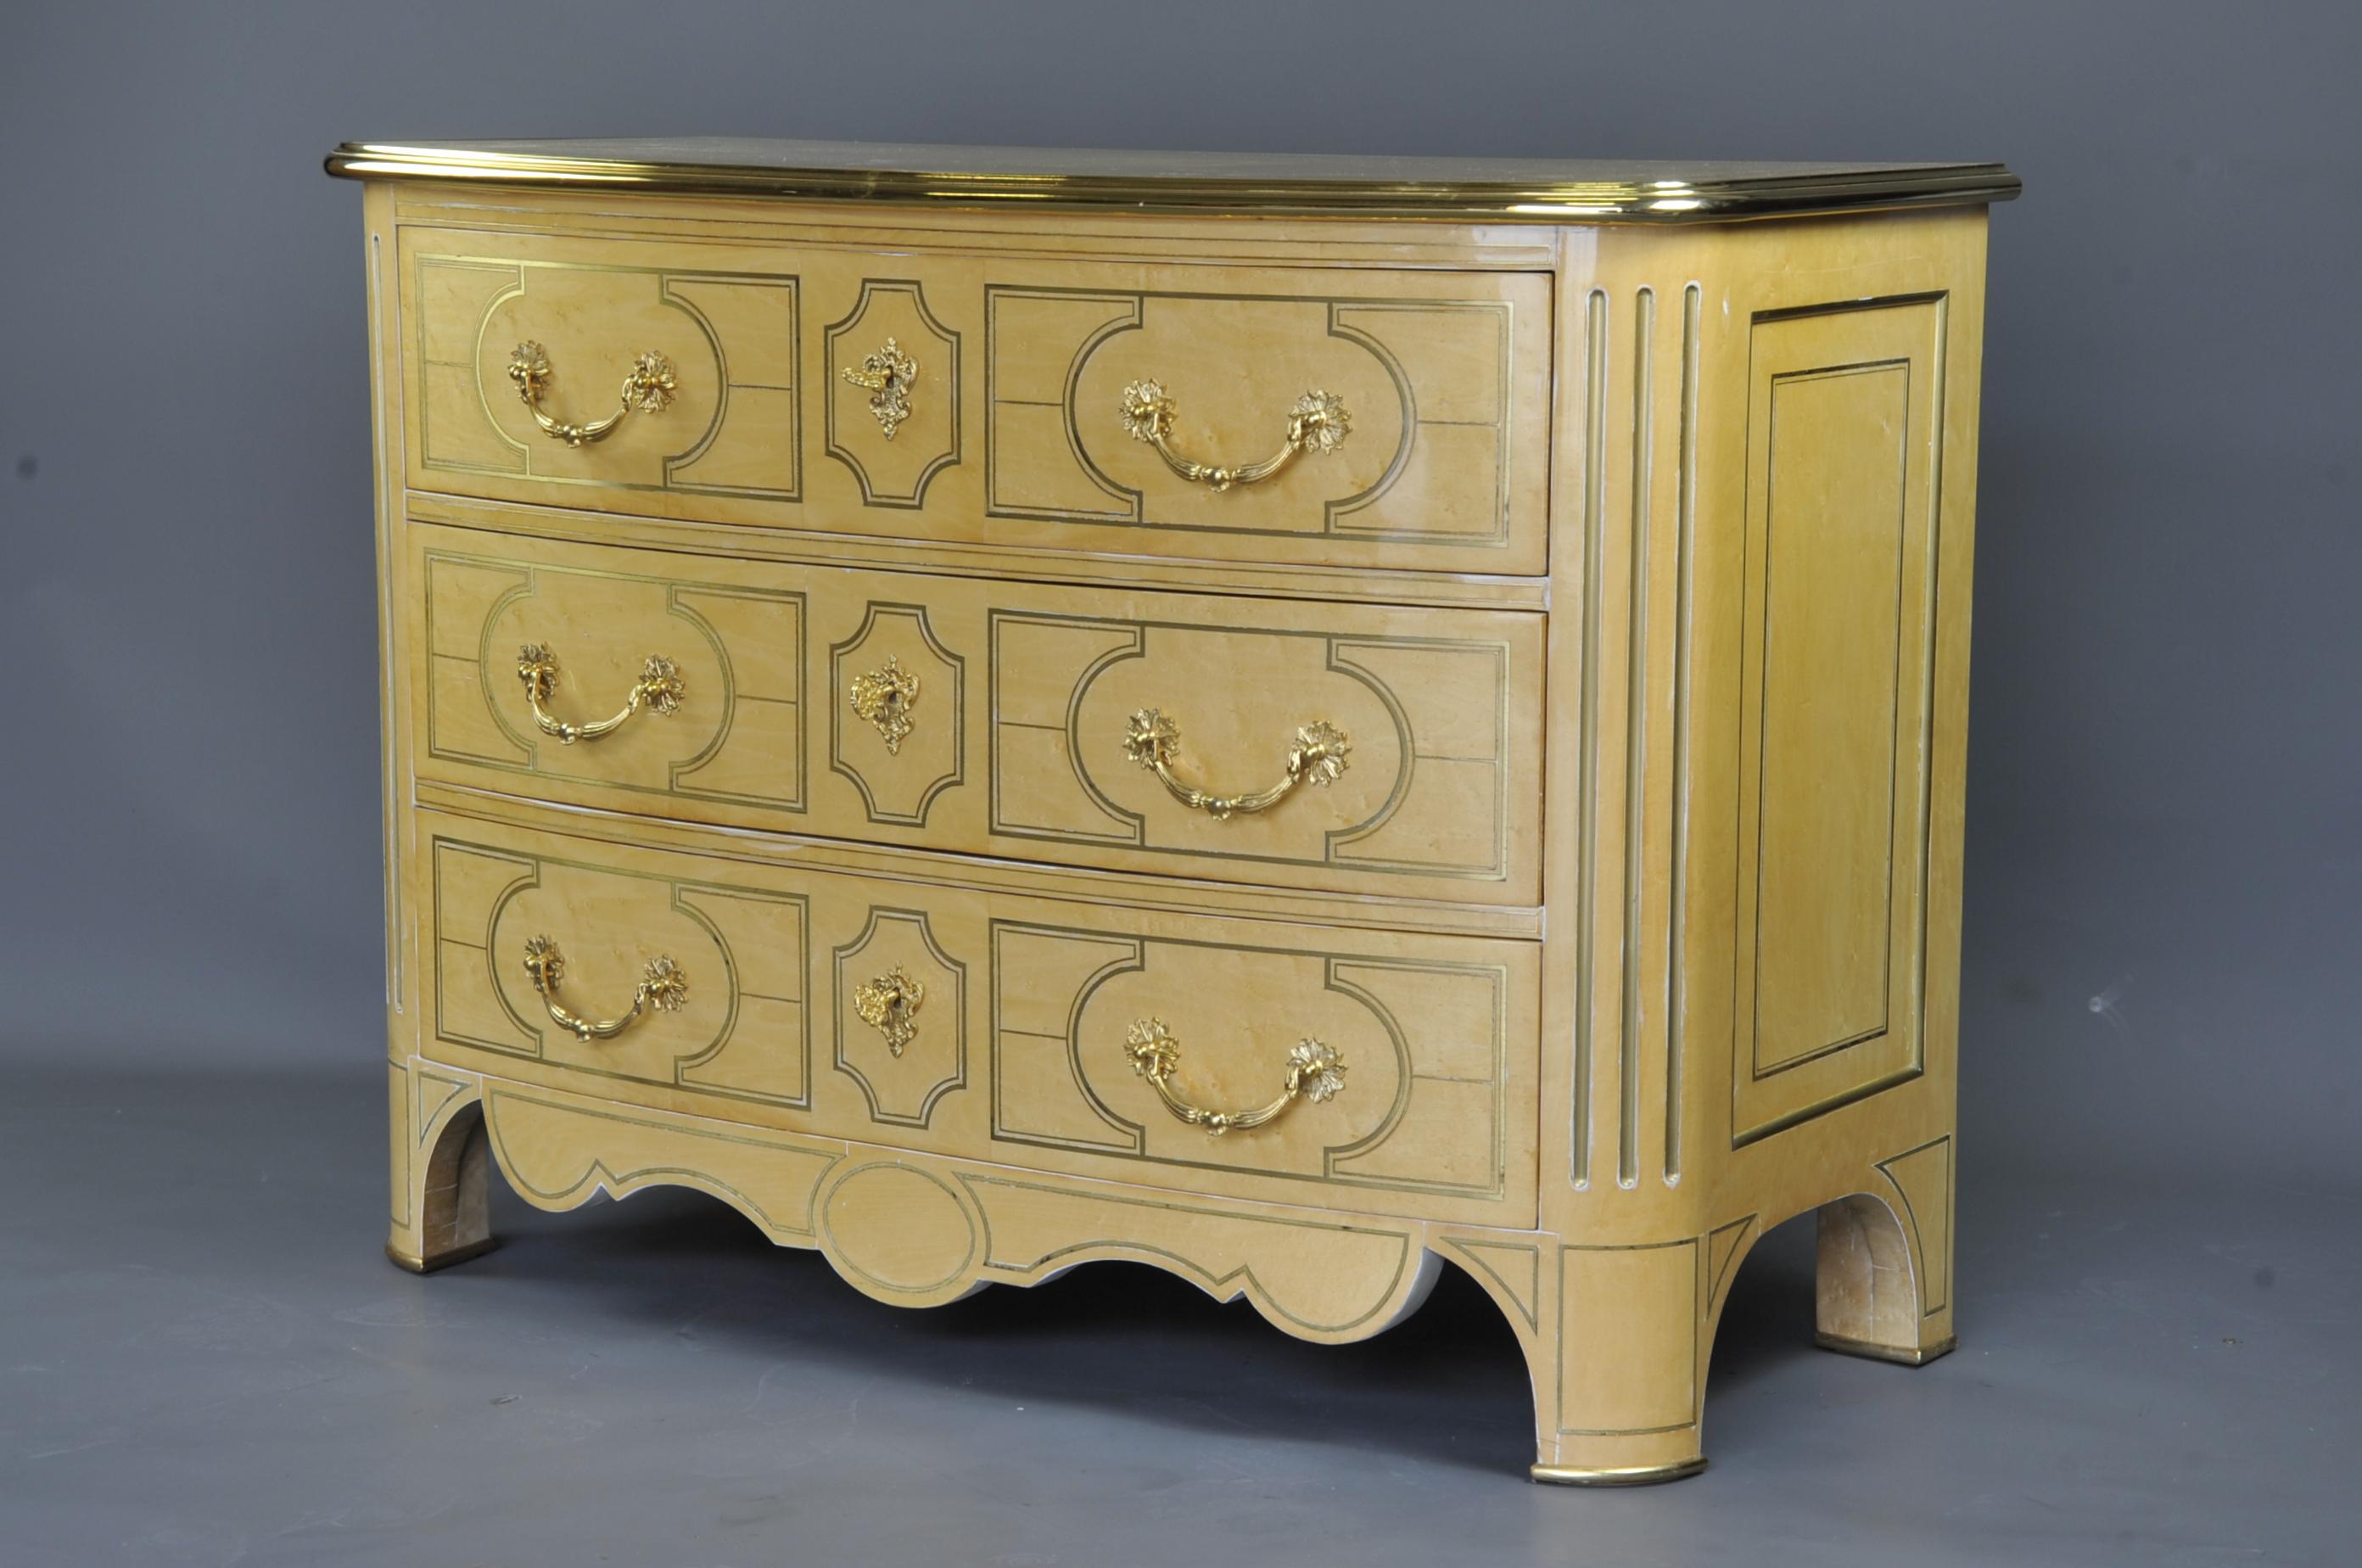 Magnificent Regency commode in lacquered wood adorned with inlaid brass fillets and presenting a beautiful ornamentation of gilded and chiseled bronze. Opening with three drawers in three rows, curved front and paneled sides, front uprights with